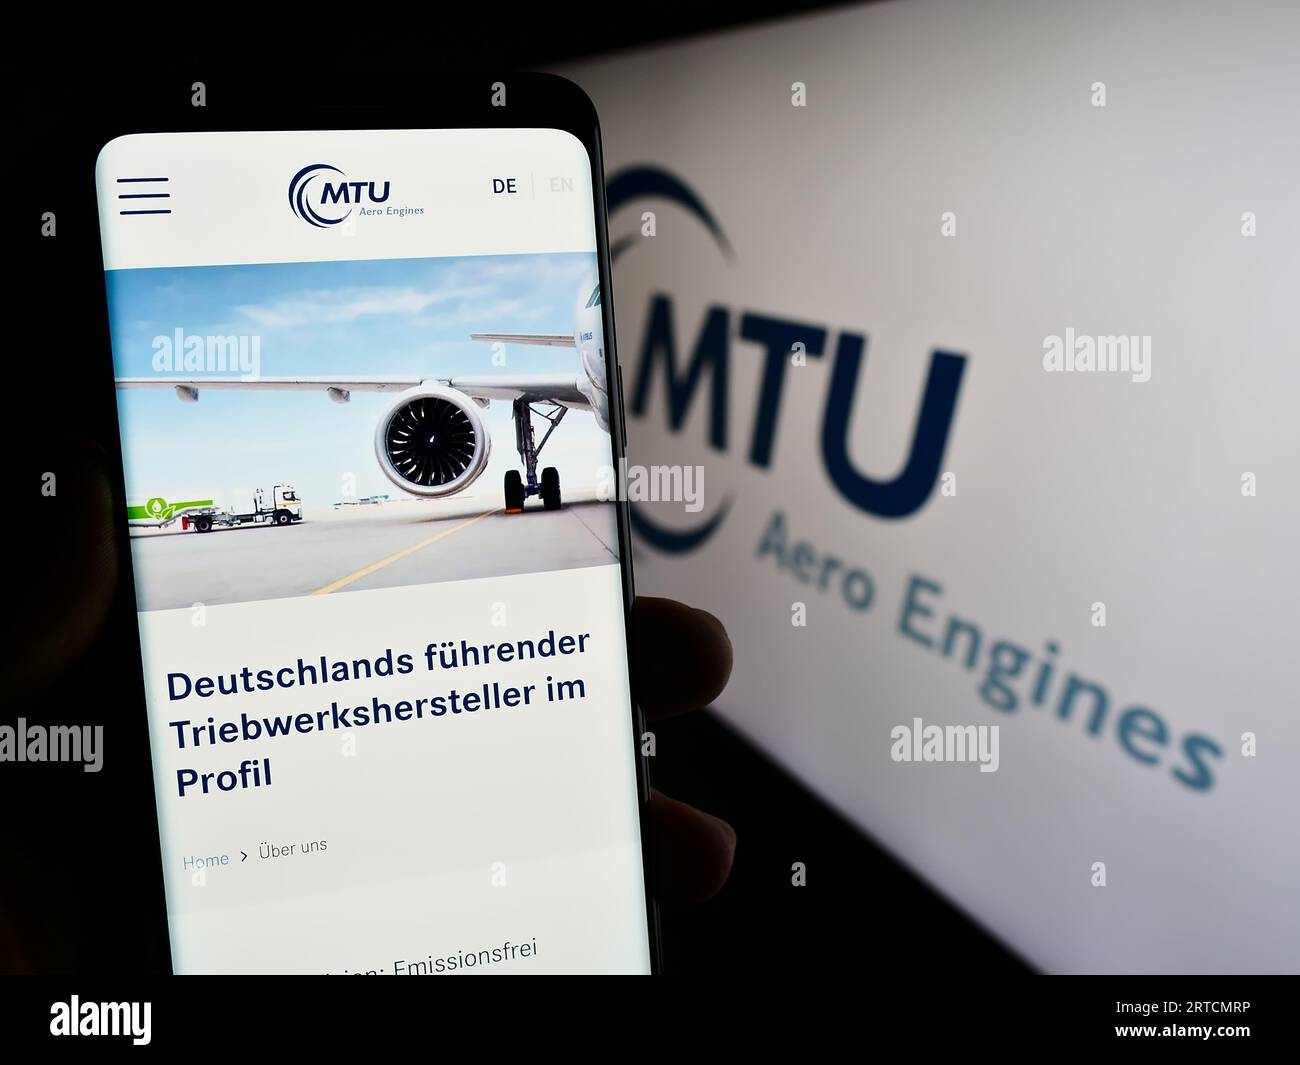 Person holding mobile phone with web page of German aviation company MTU Aero Engines AG on screen with logo. Focus on center of phone display. Stock Photo